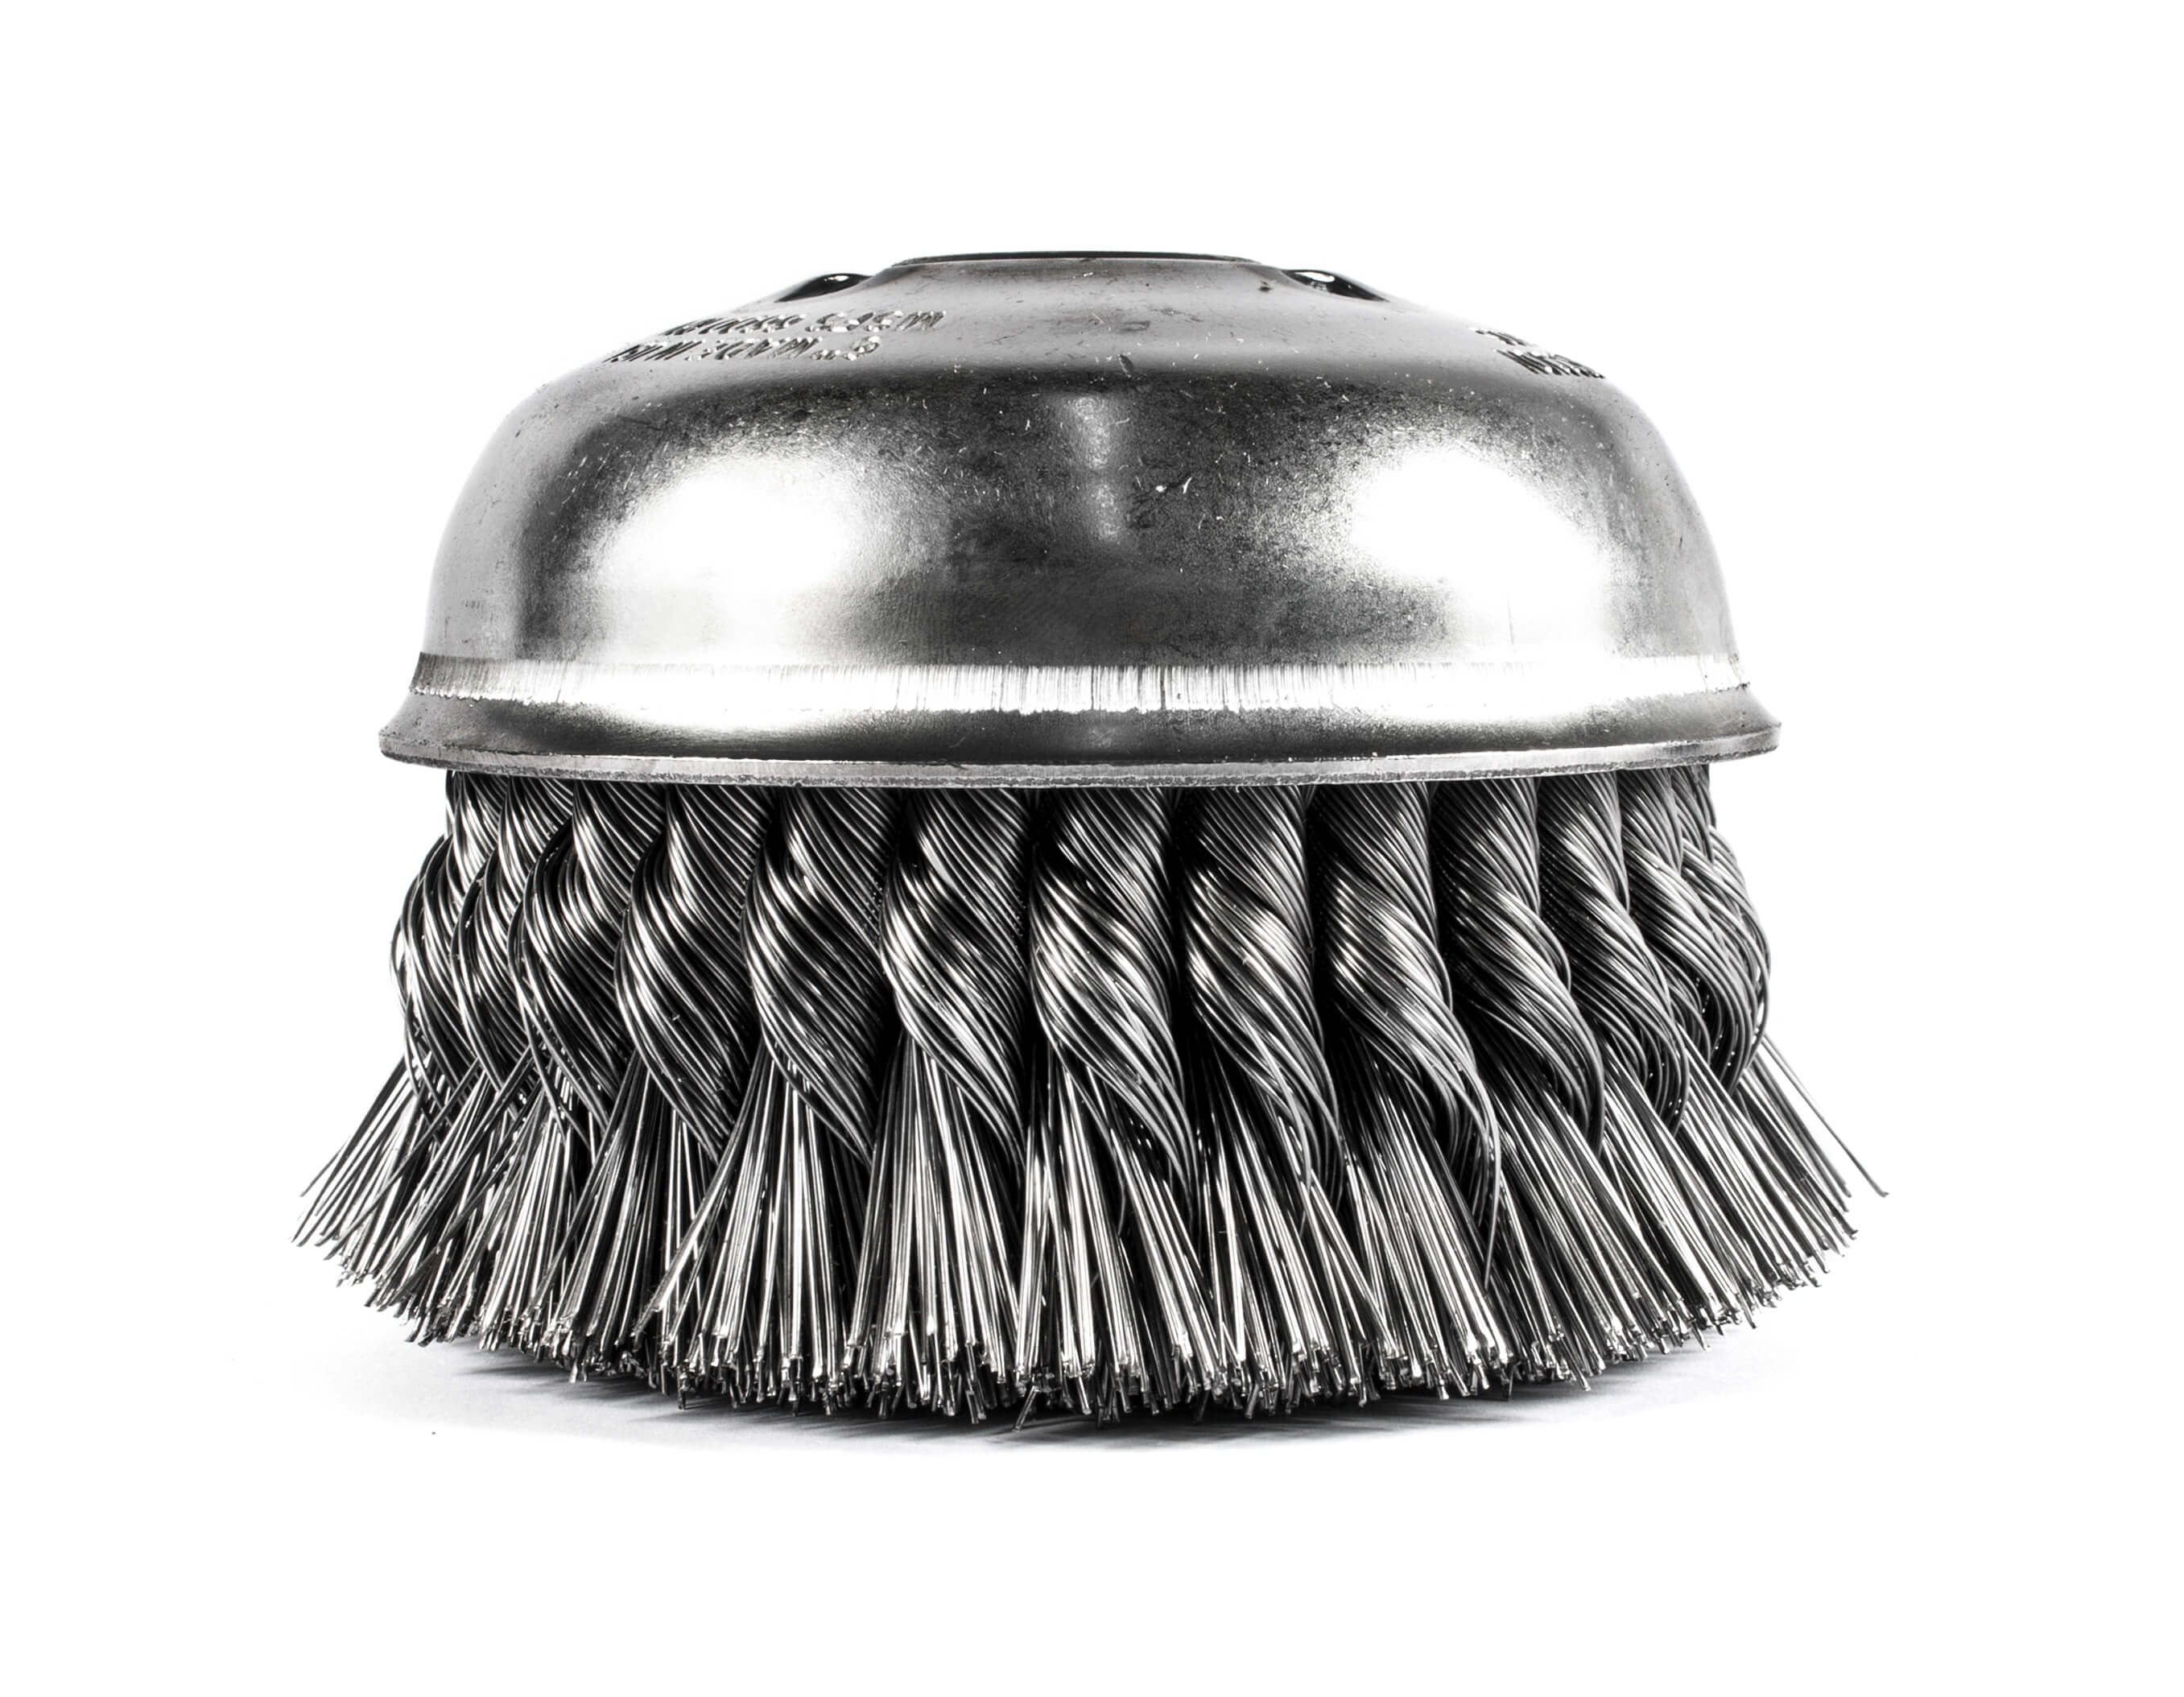 6 KNOT STYLE CUP BRUSH STEEL 5/8-11 HOLE